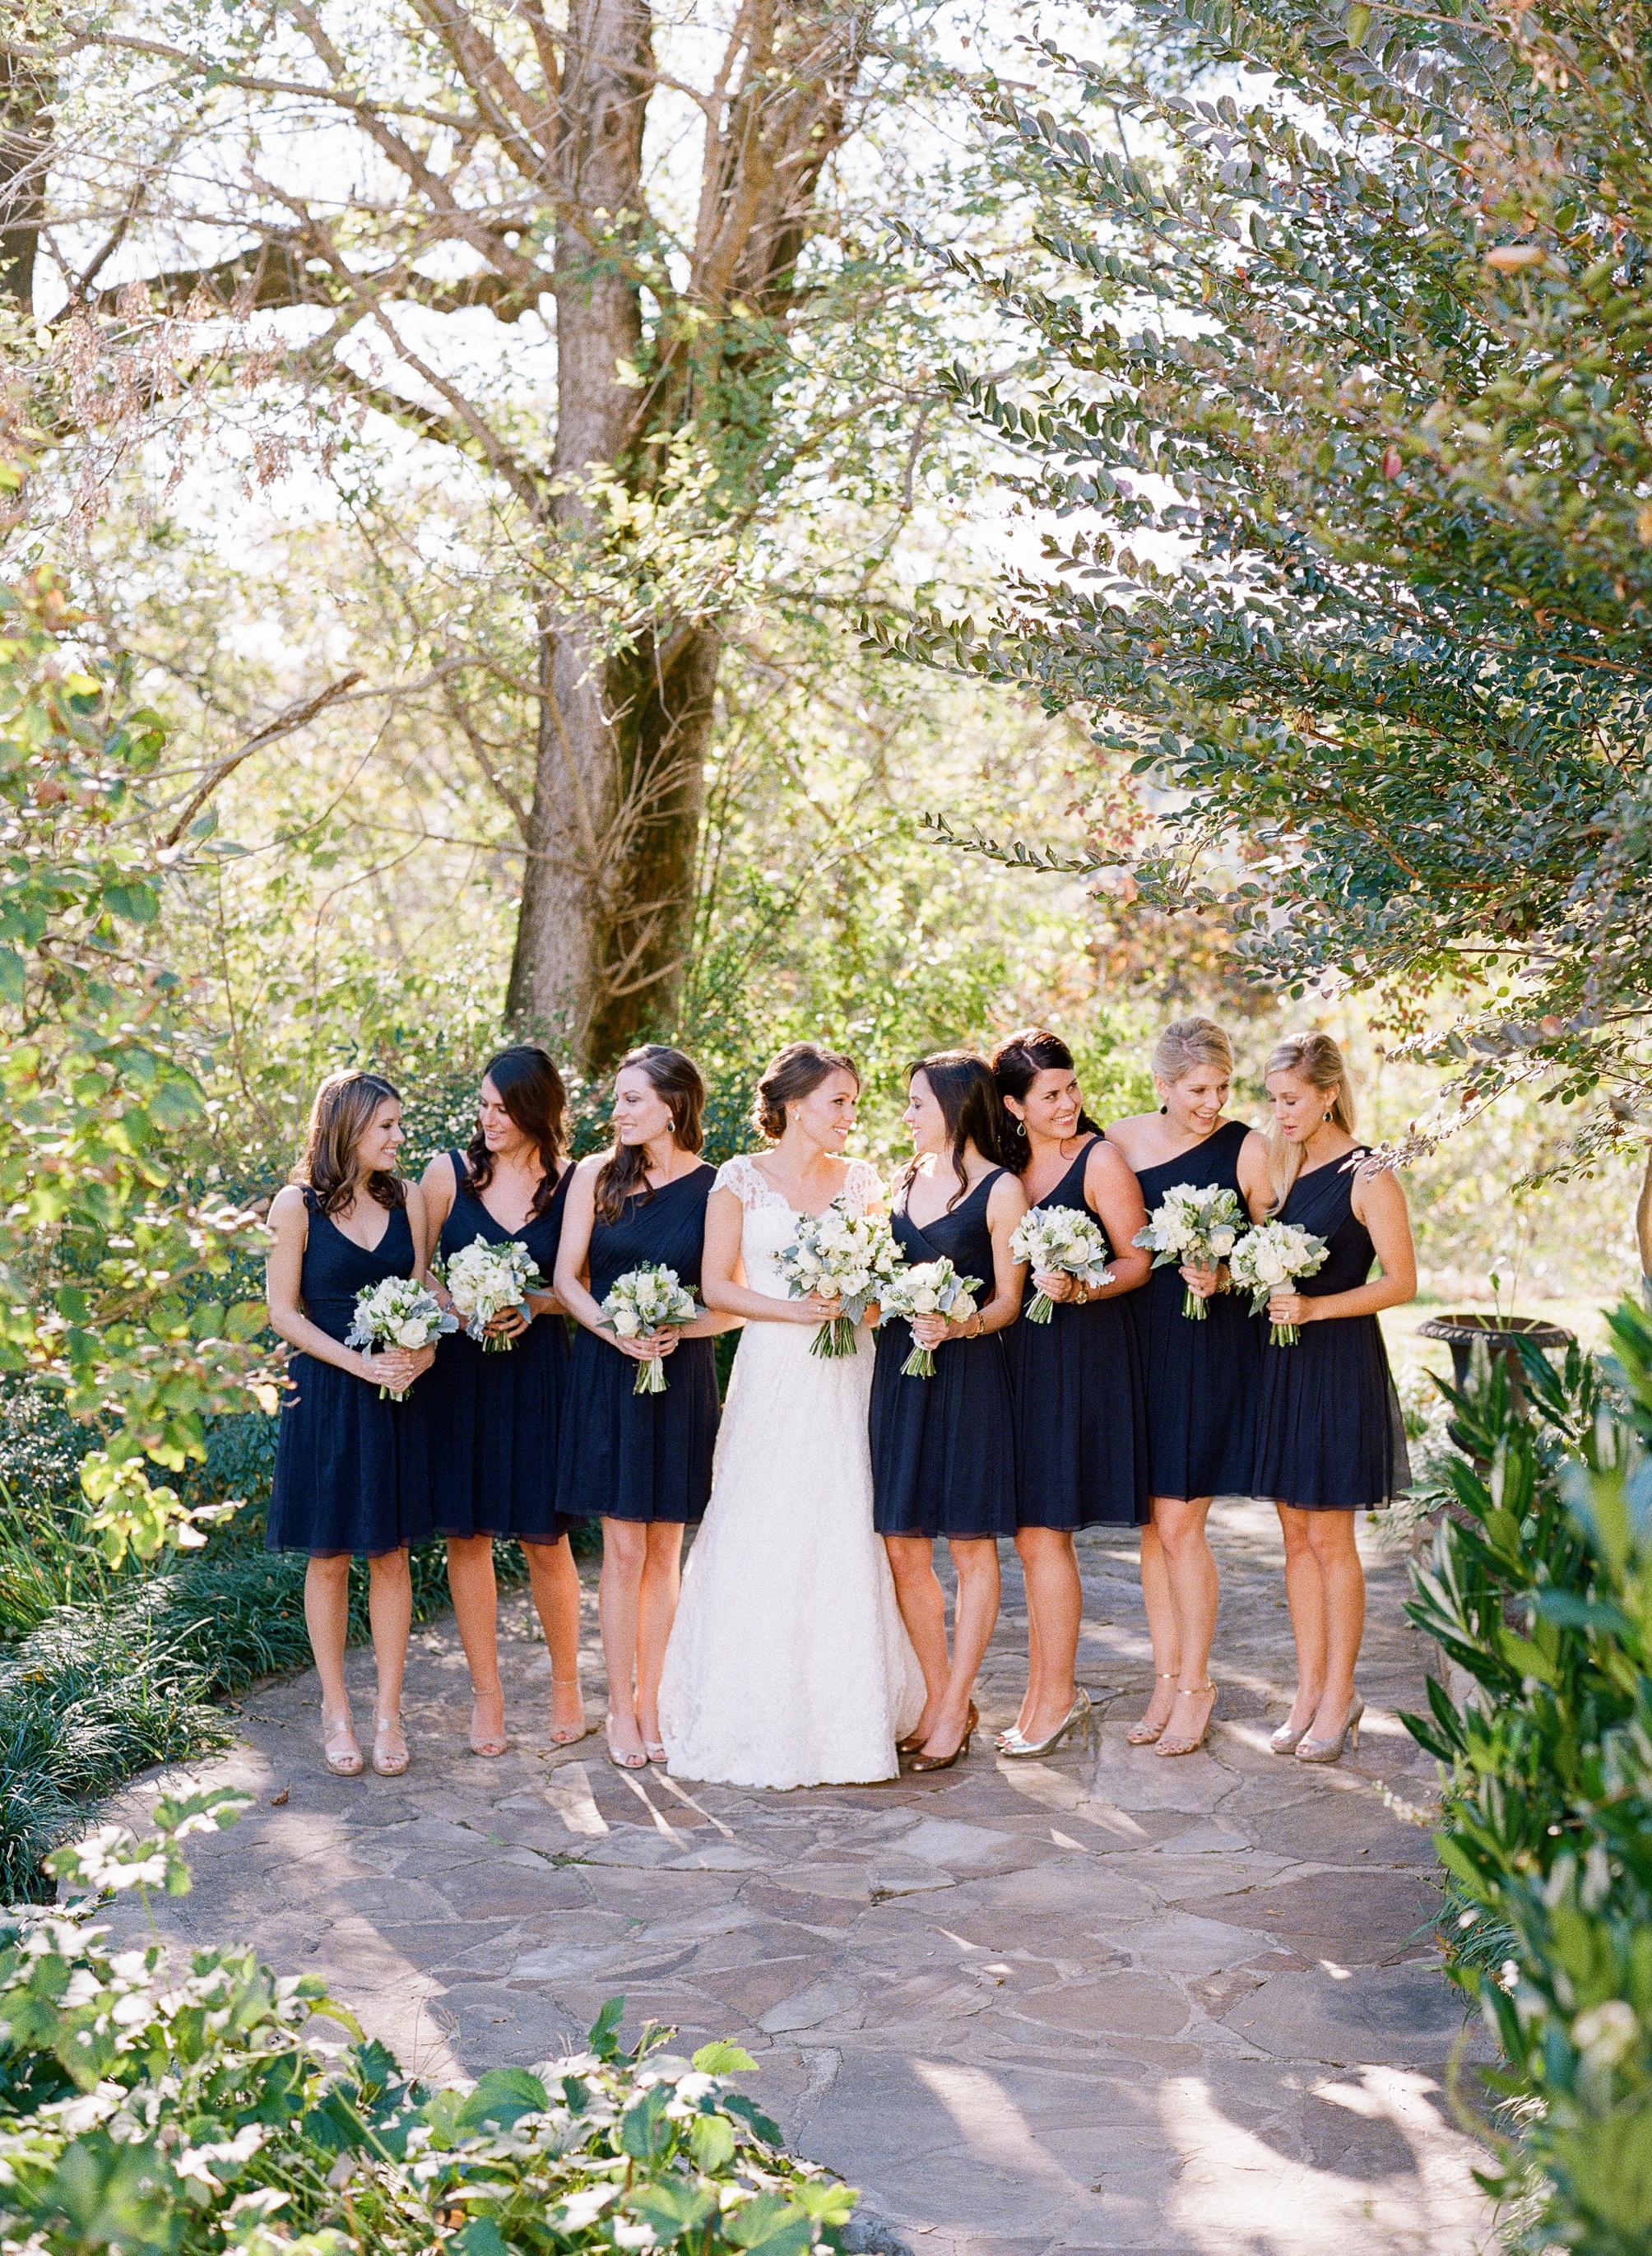 Intimate Southern Wedding Dressed in Neutrals